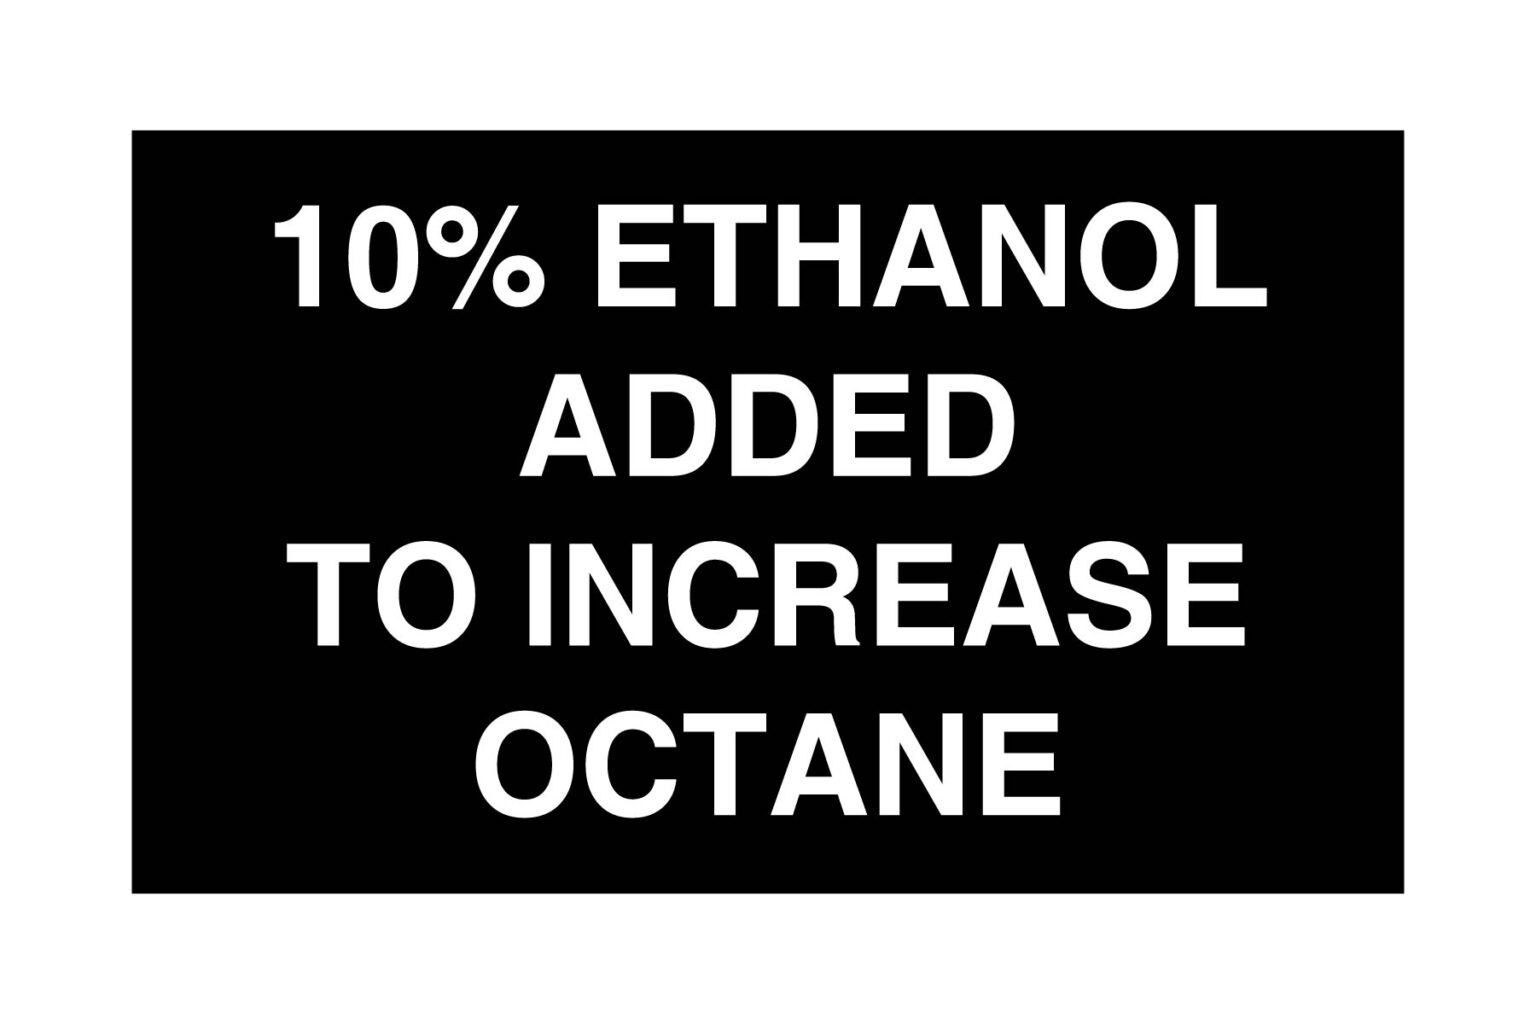 Gas Station 10% Ethanol Added to Increase Octane Decal White on Black 5x3